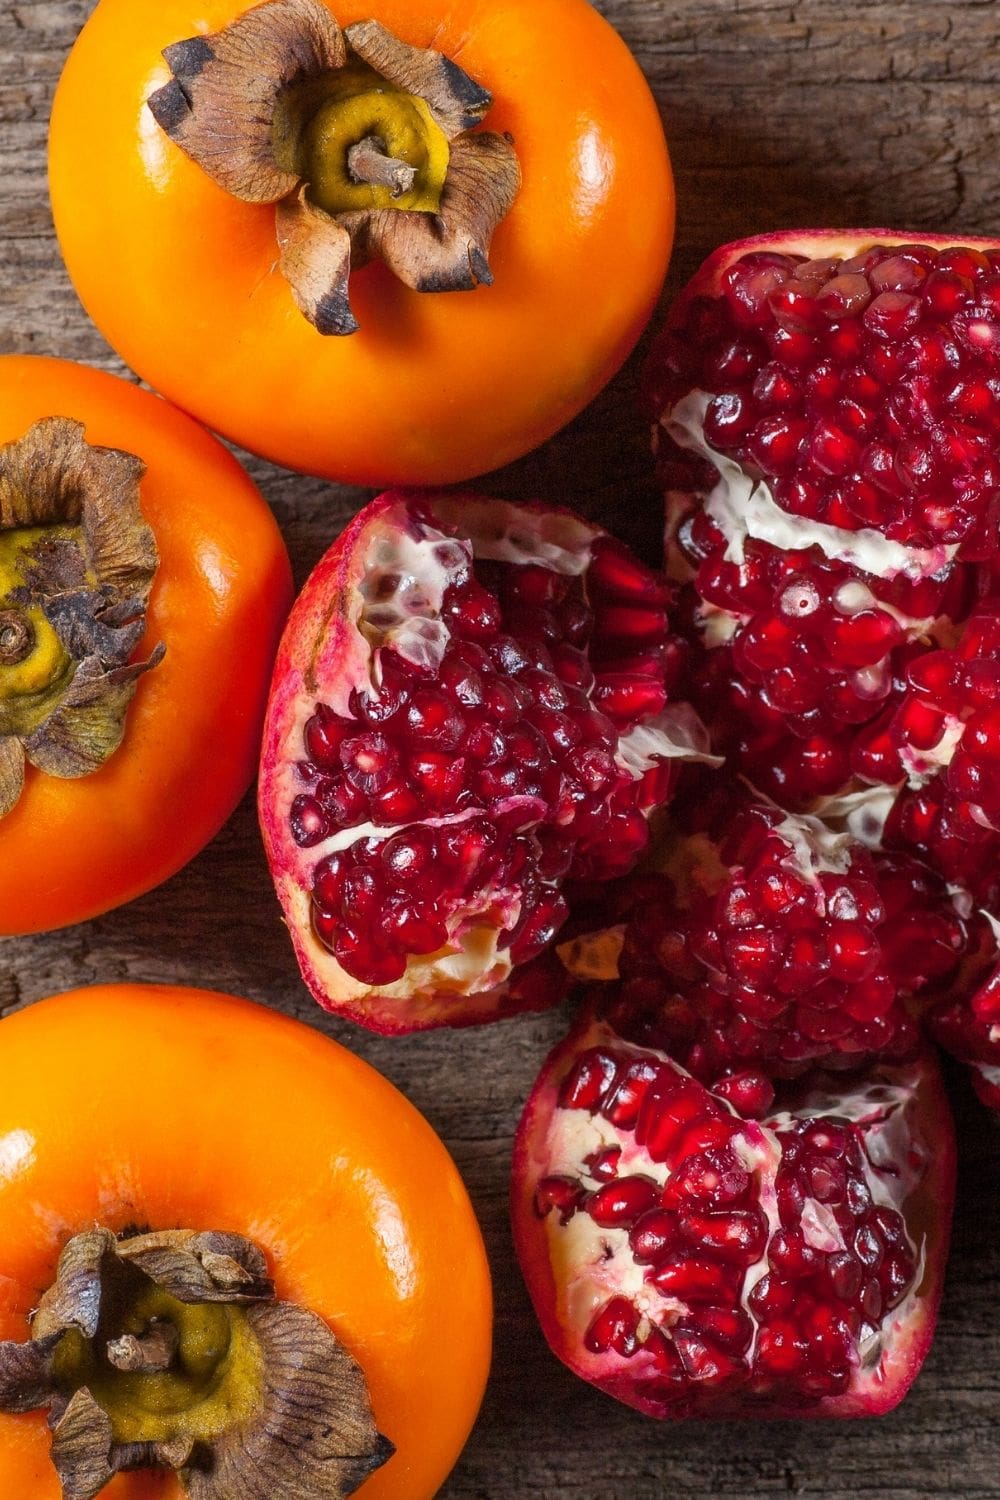 pomegranate and persimmons